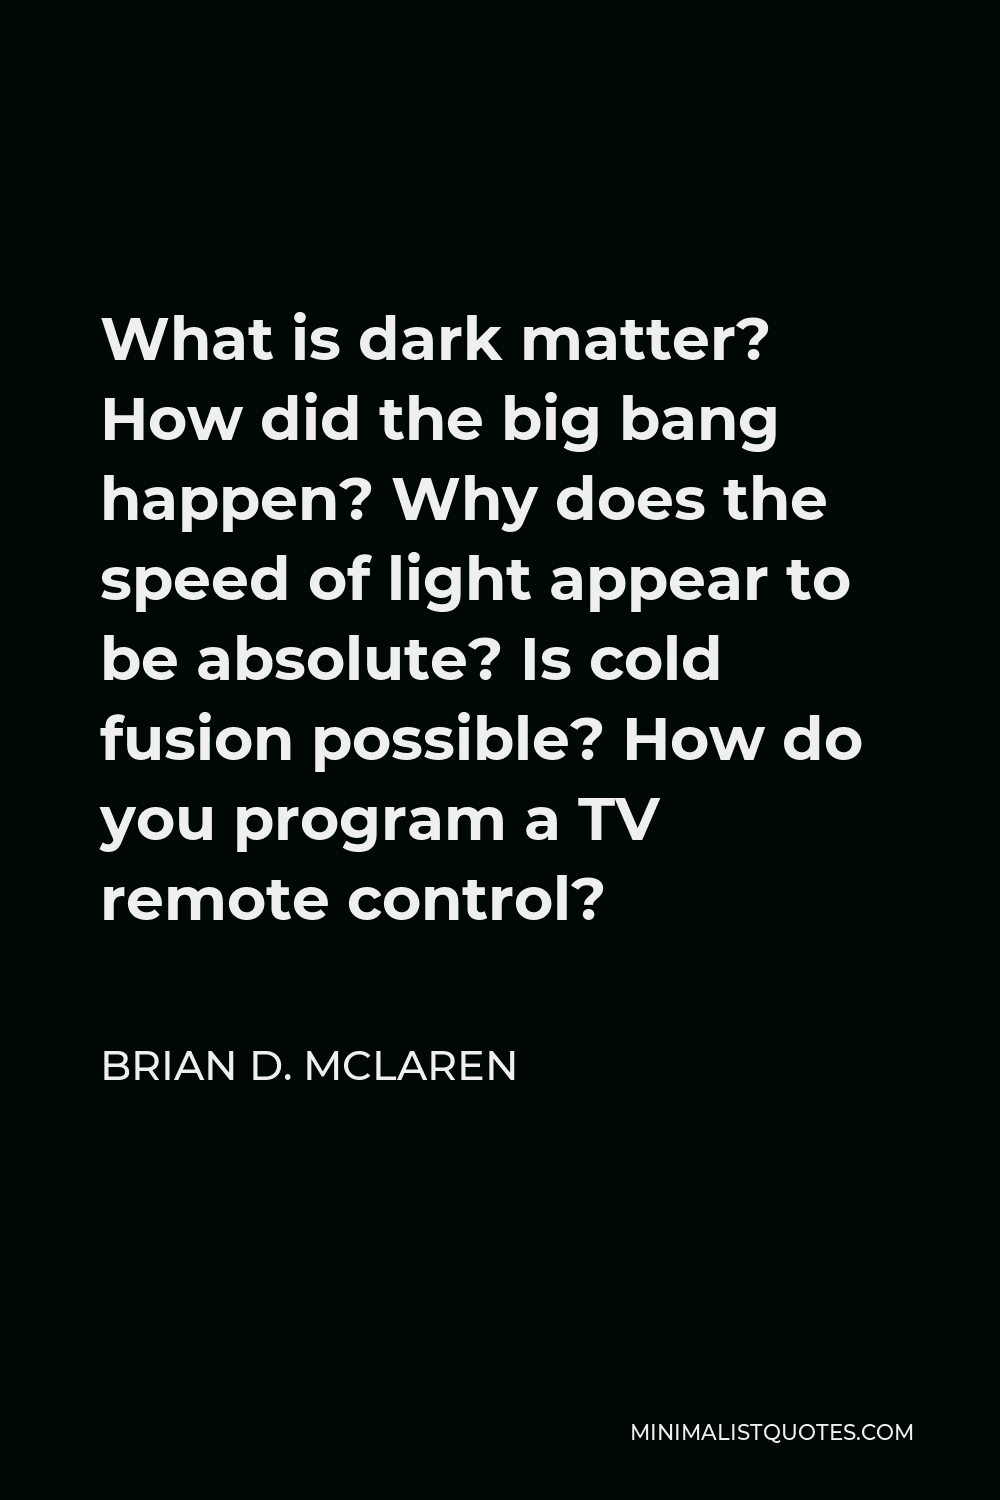 Brian D. McLaren Quote - What is dark matter? How did the big bang happen? Why does the speed of light appear to be absolute? Is cold fusion possible? How do you program a TV remote control?